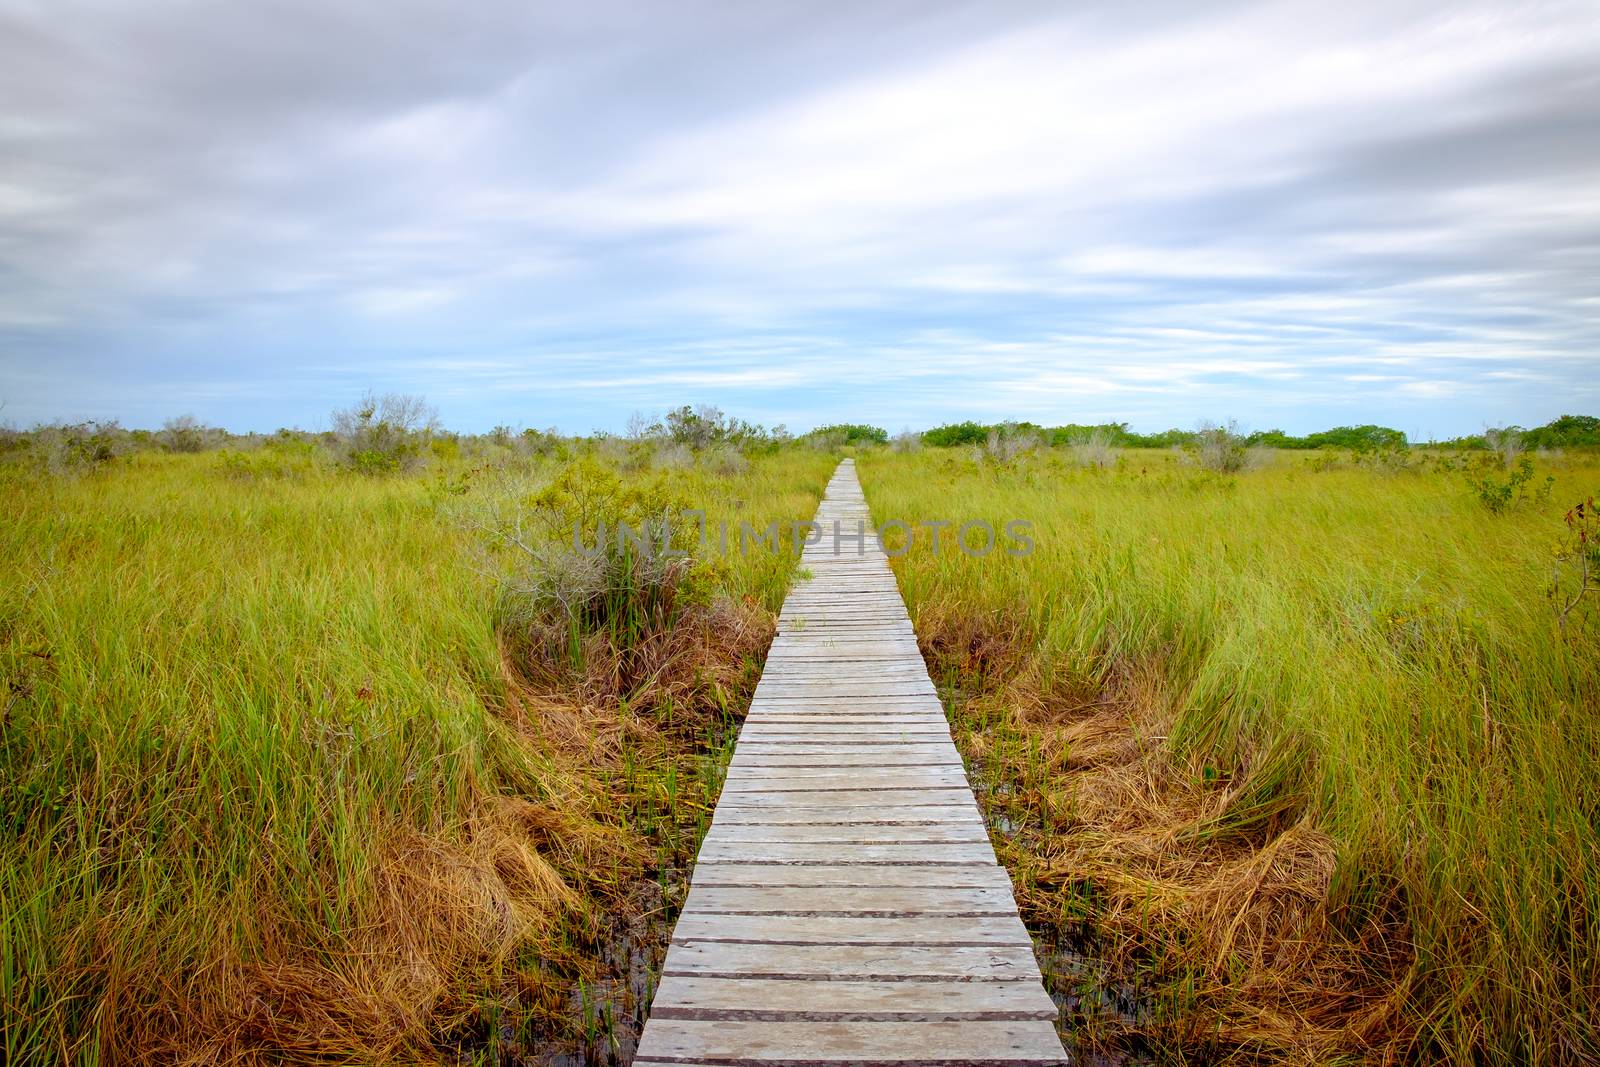 Landscape view of wooden boardwalk in swamp covered by greed grass